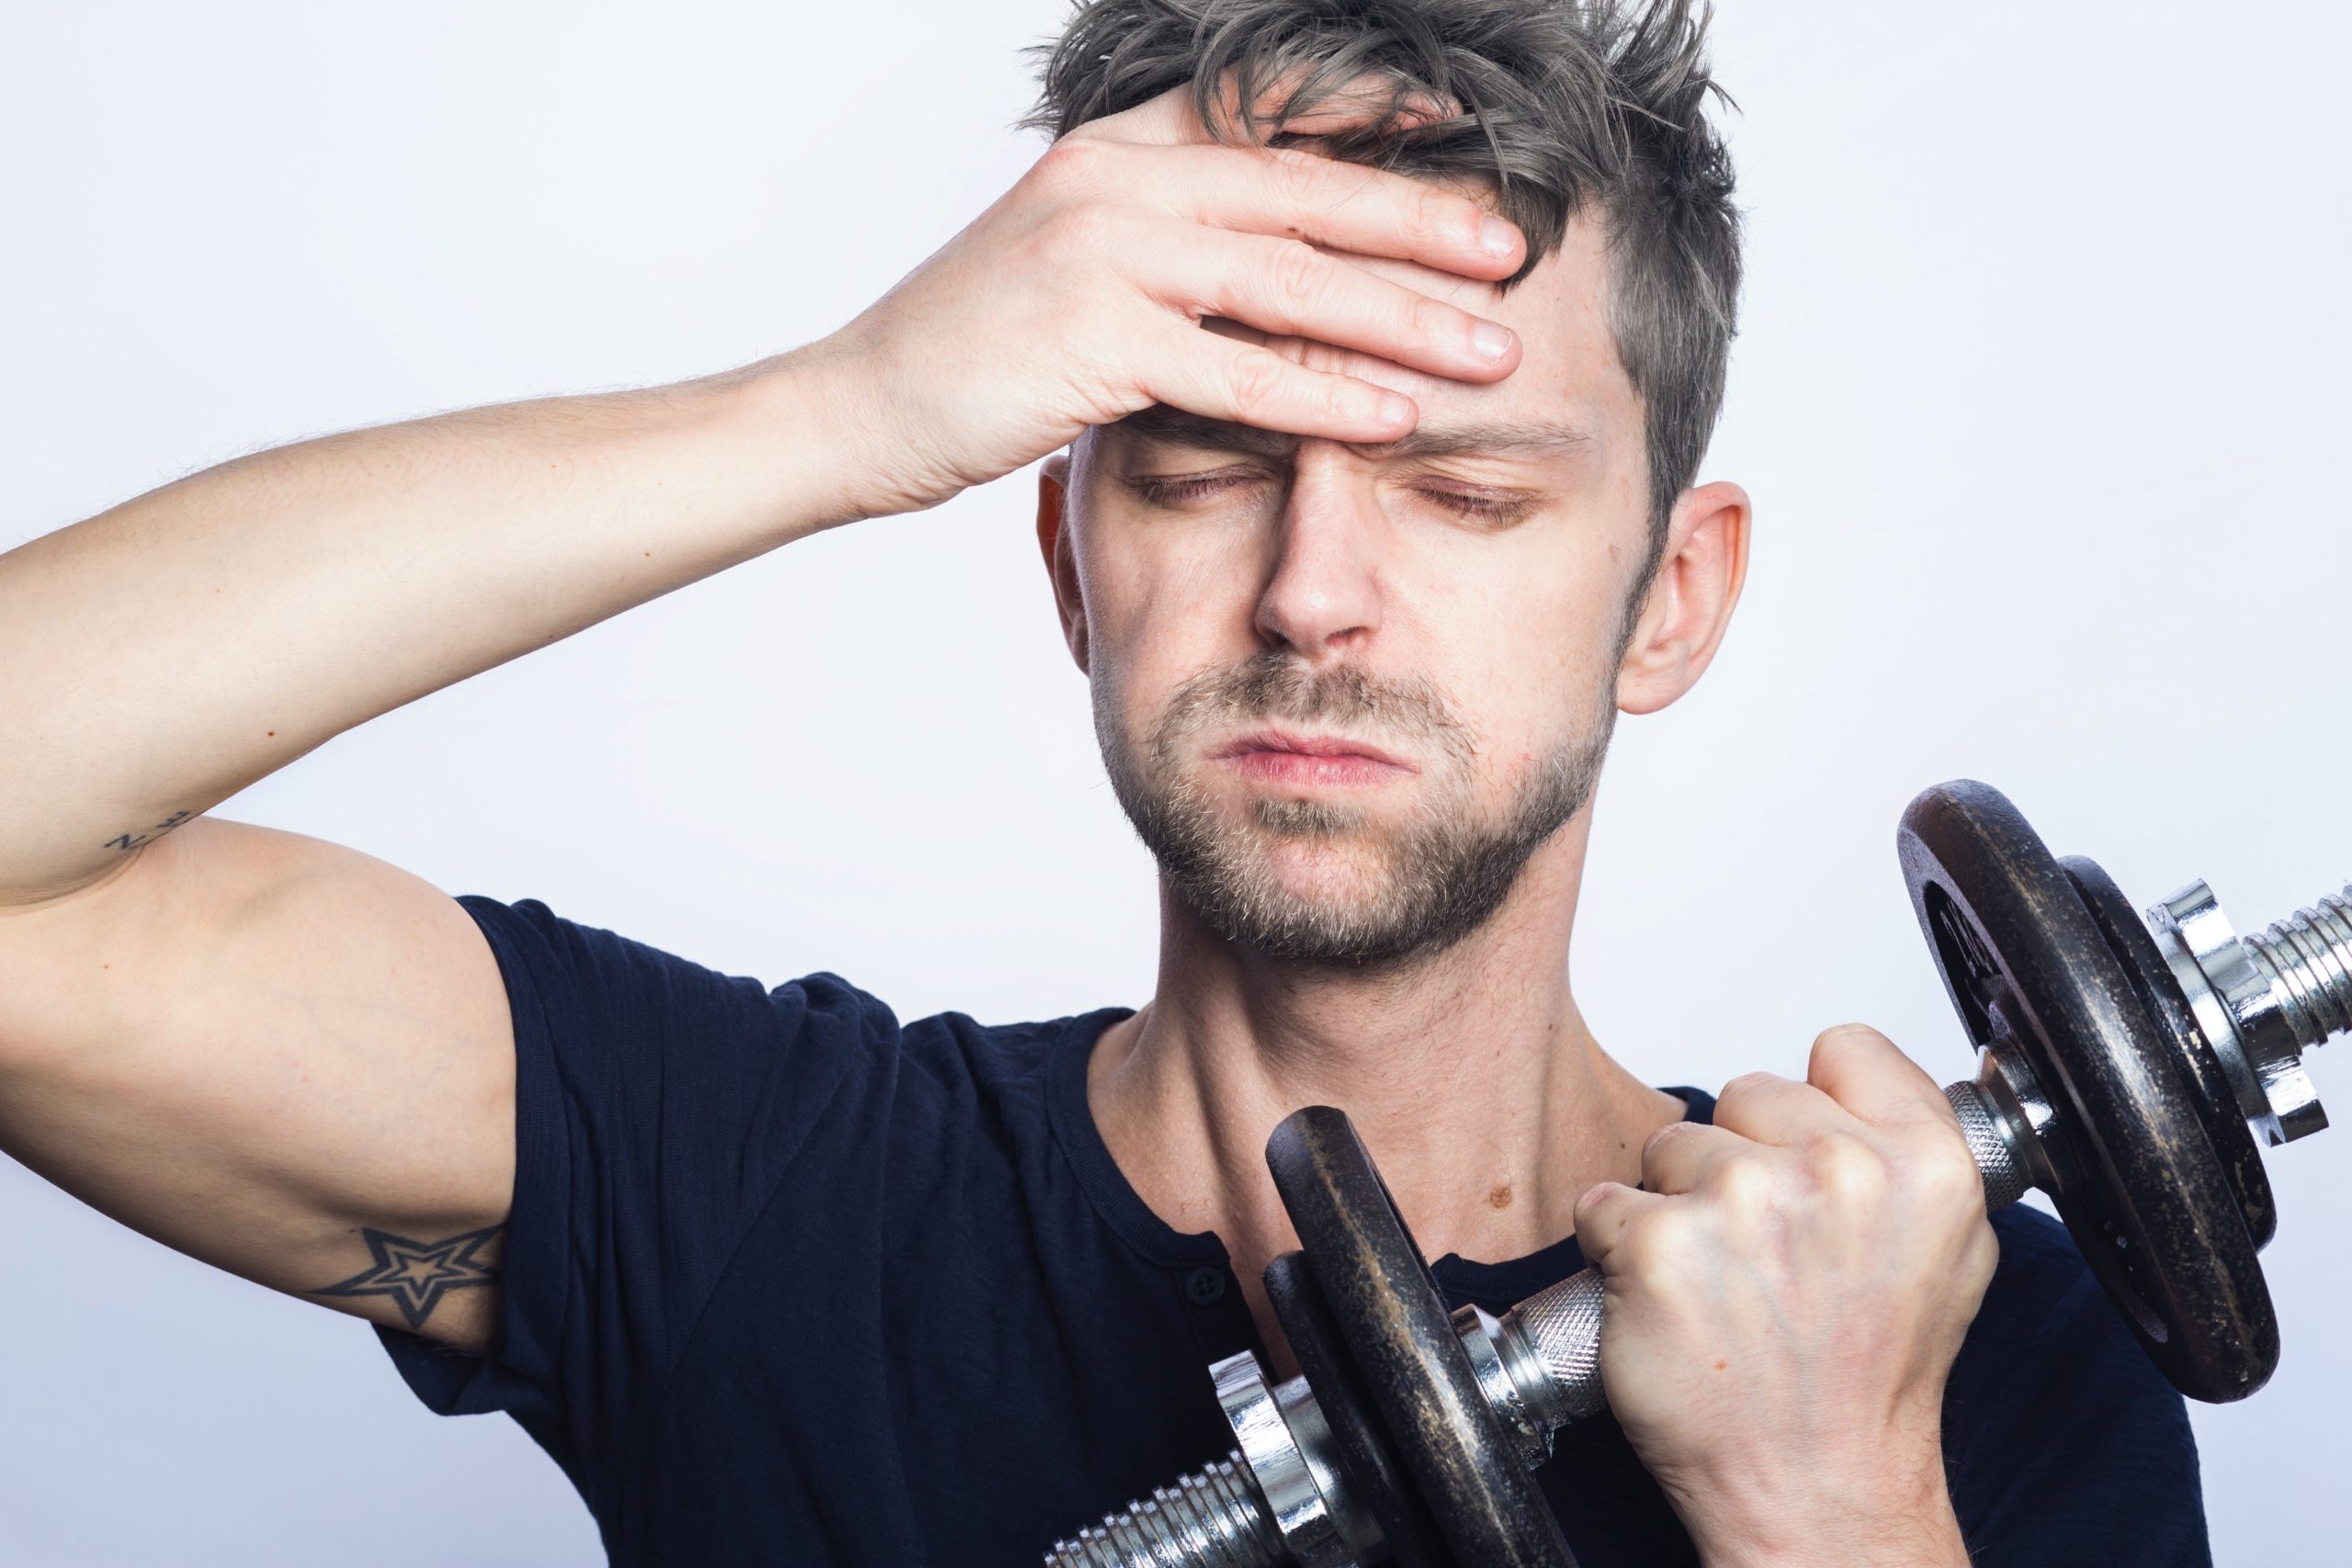 Man trying to motivate himself to work out